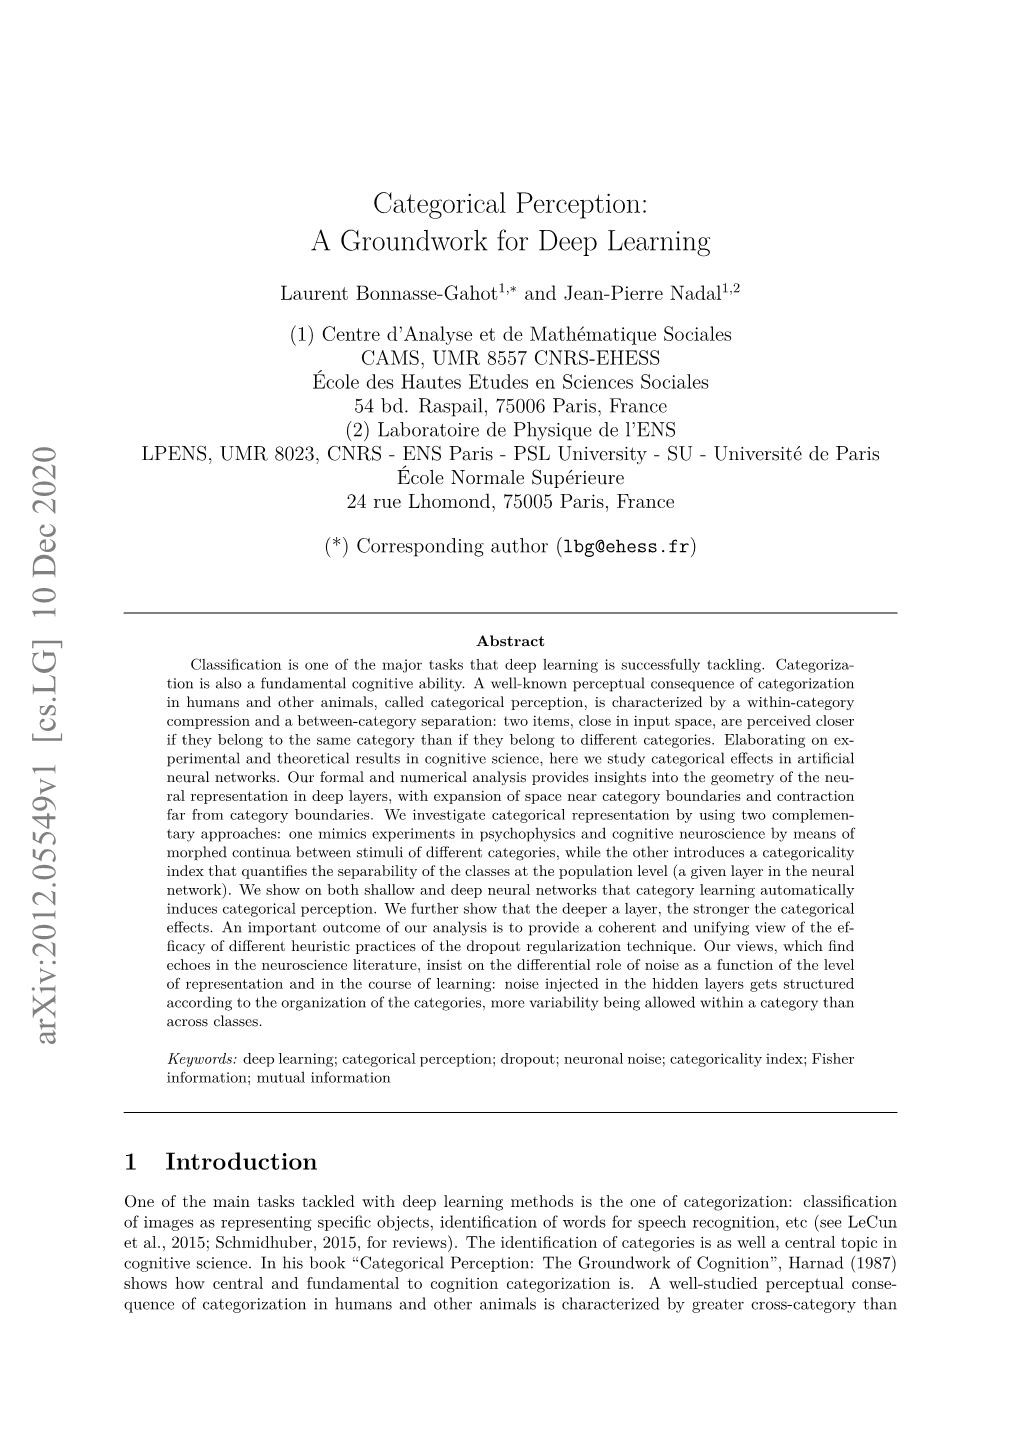 Categorical Perception: a Groundwork for Deep Learning